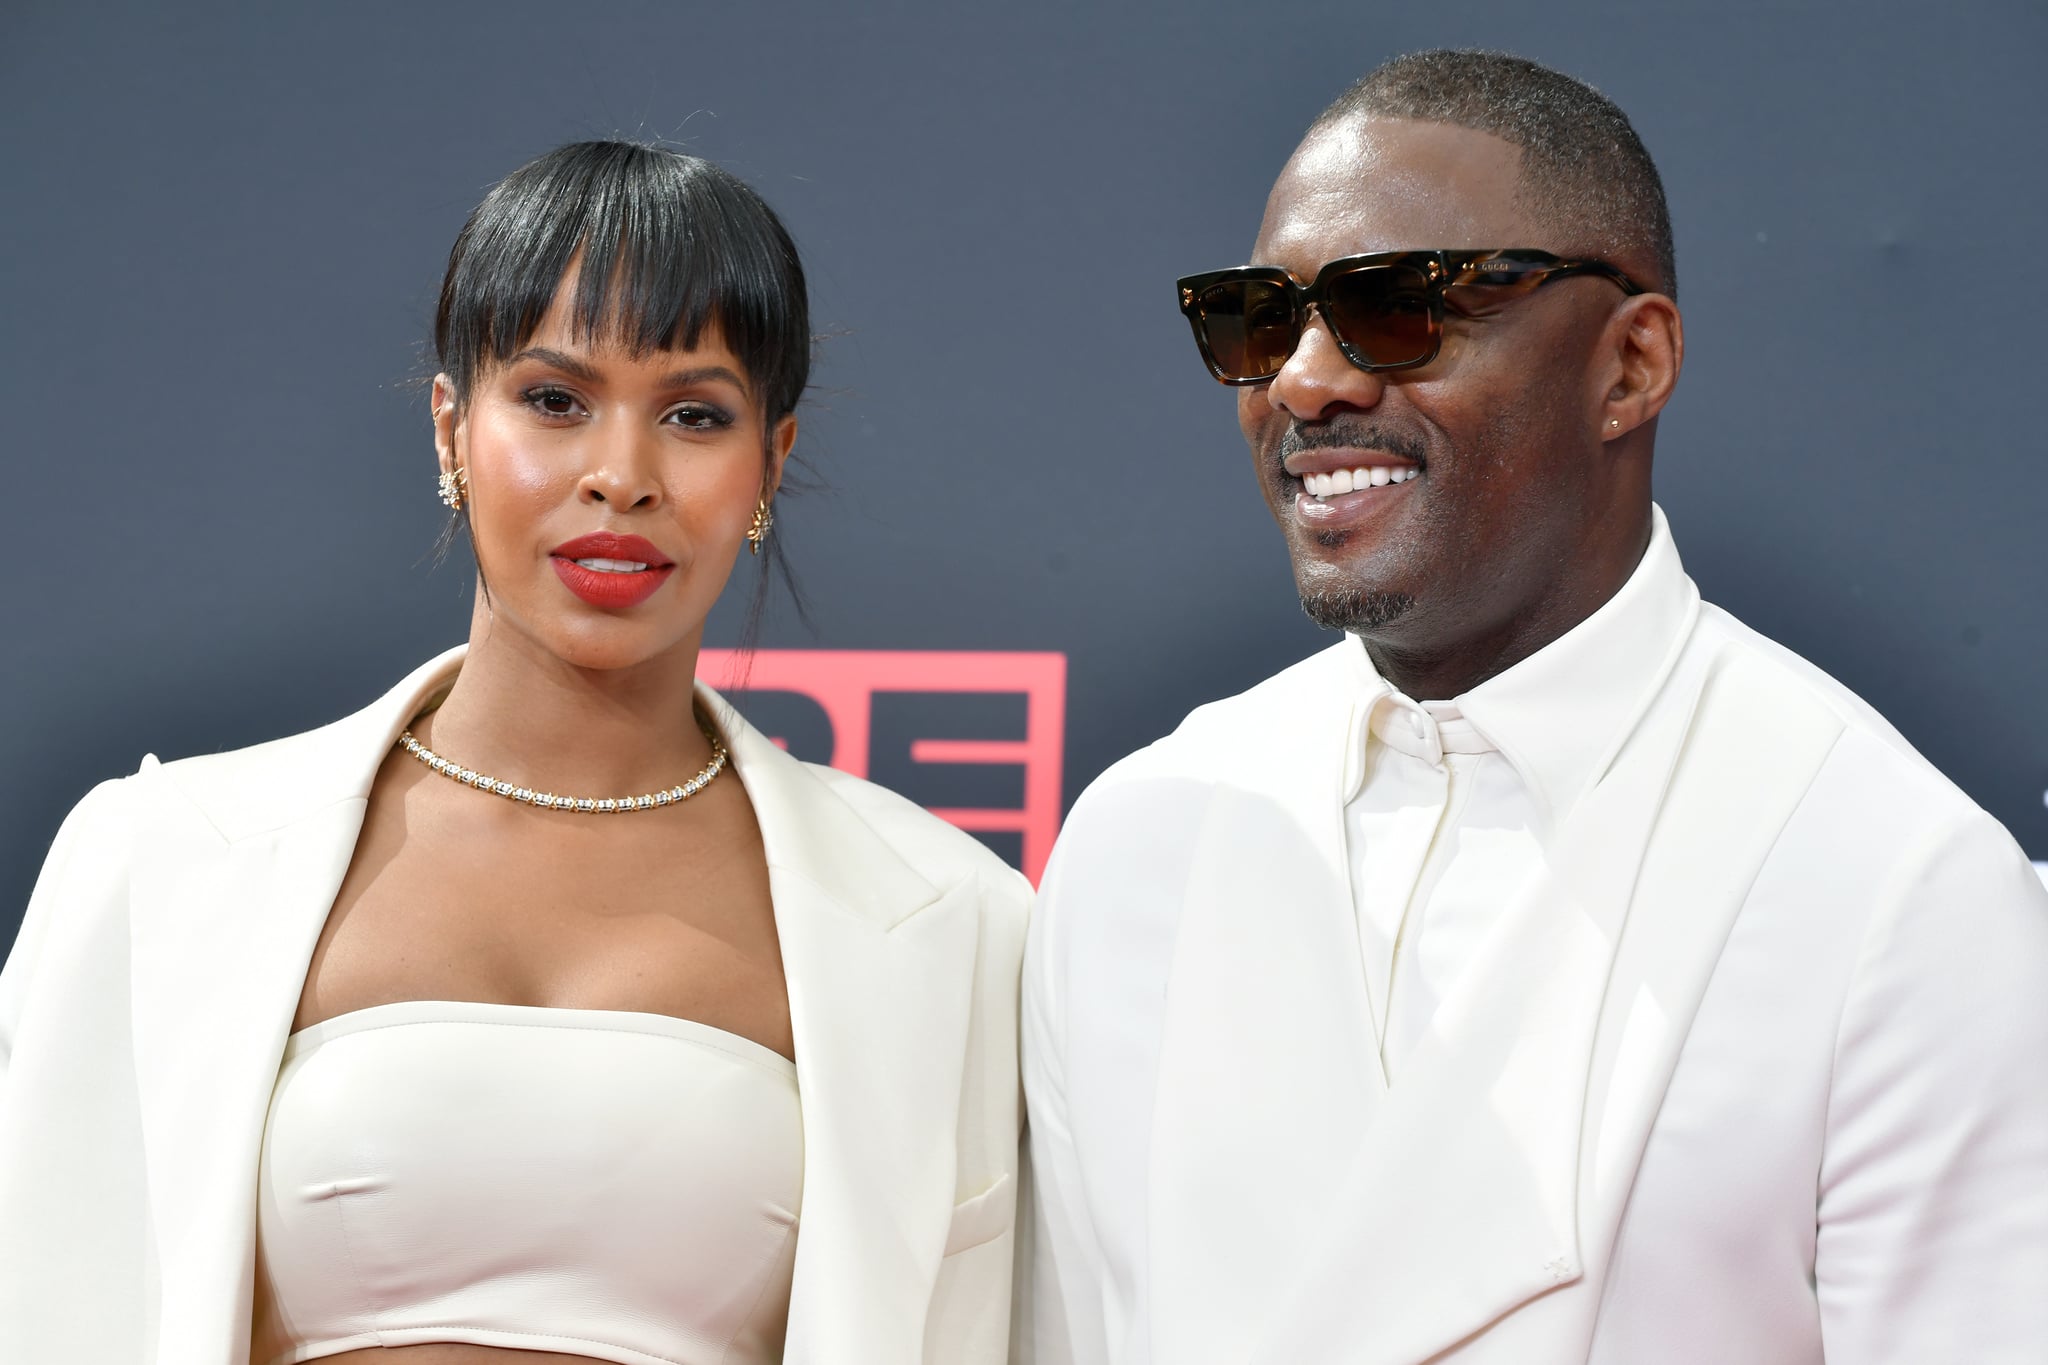 LOS ANGELES, CALIFORNIA - JUNE 26: (L-R) Sabrina Dhowre Elba and Idris Elba attend the 2022 BET Awards at Microsoft Theater on June 26, 2022 in Los Angeles, California. (Photo by Rodin Eckenroth/FilmMagic)